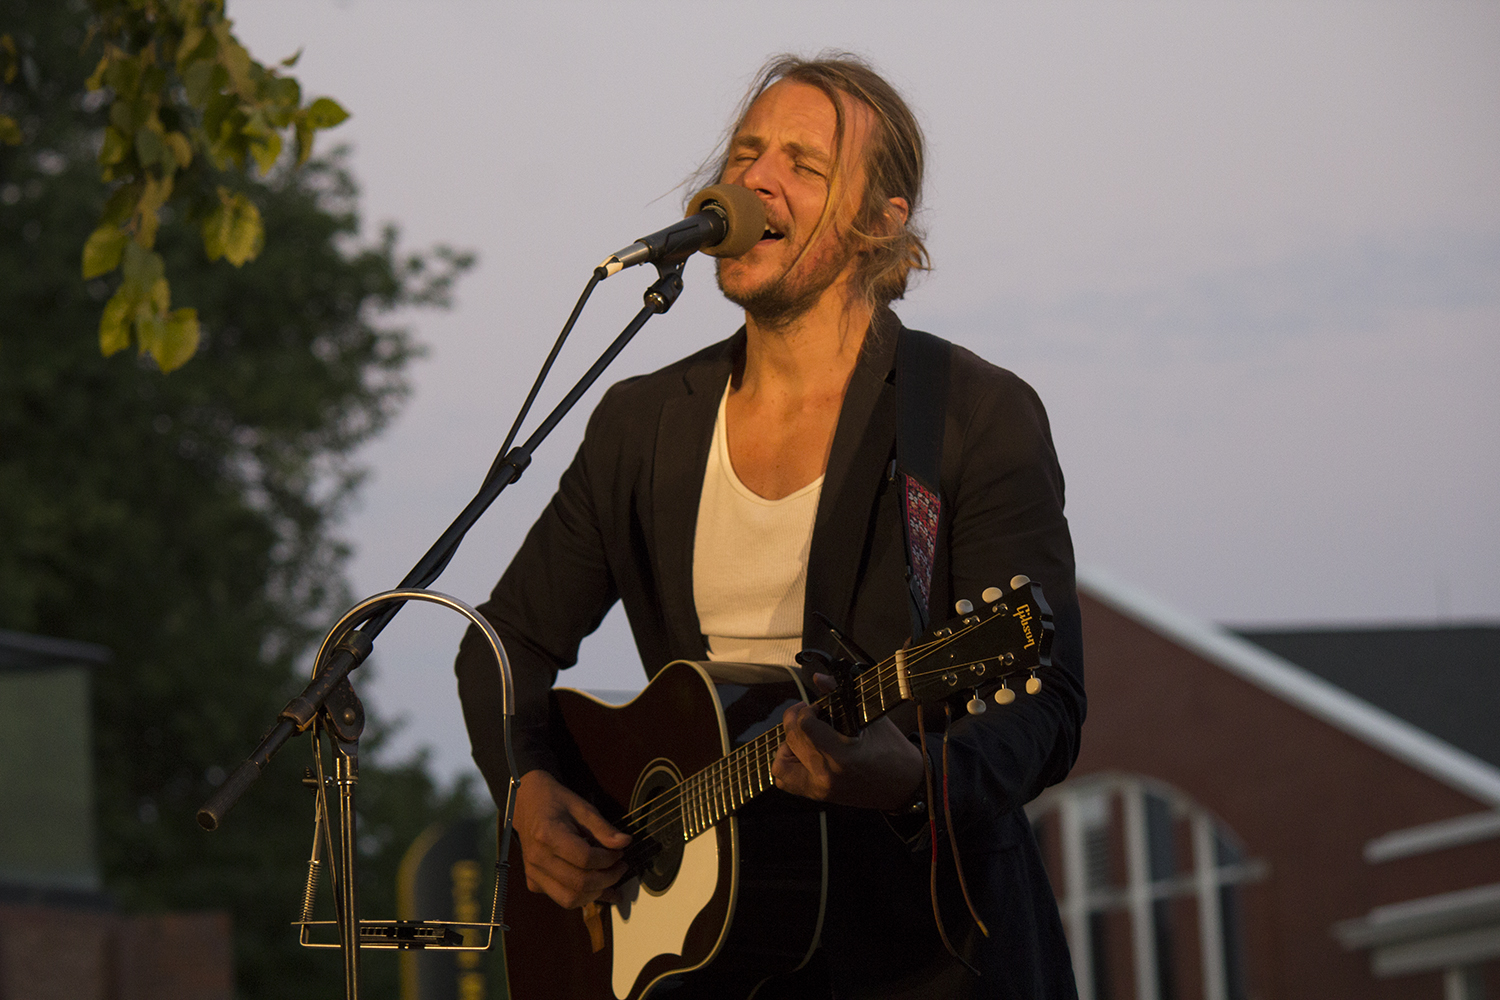 Charlie Mars, playing guitar and singing at Ulrich Museum.